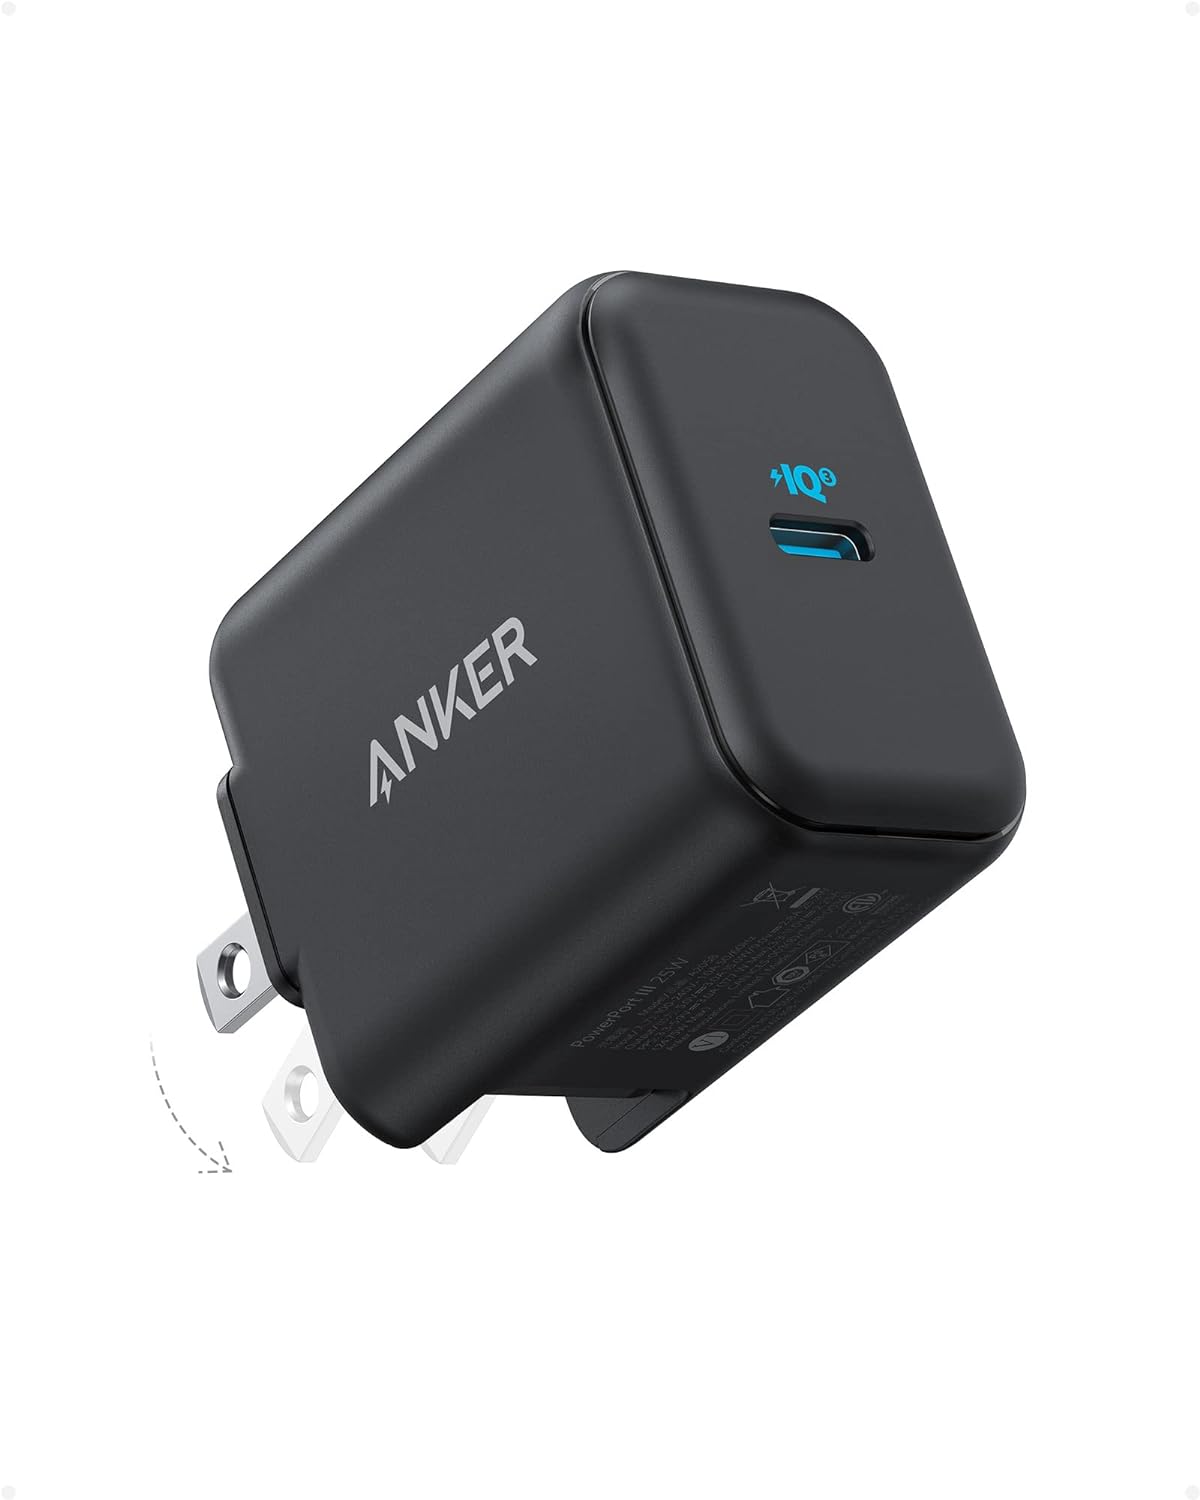 Anker 312 25W Ace Charger with foldable US Pin and 18 months warranty